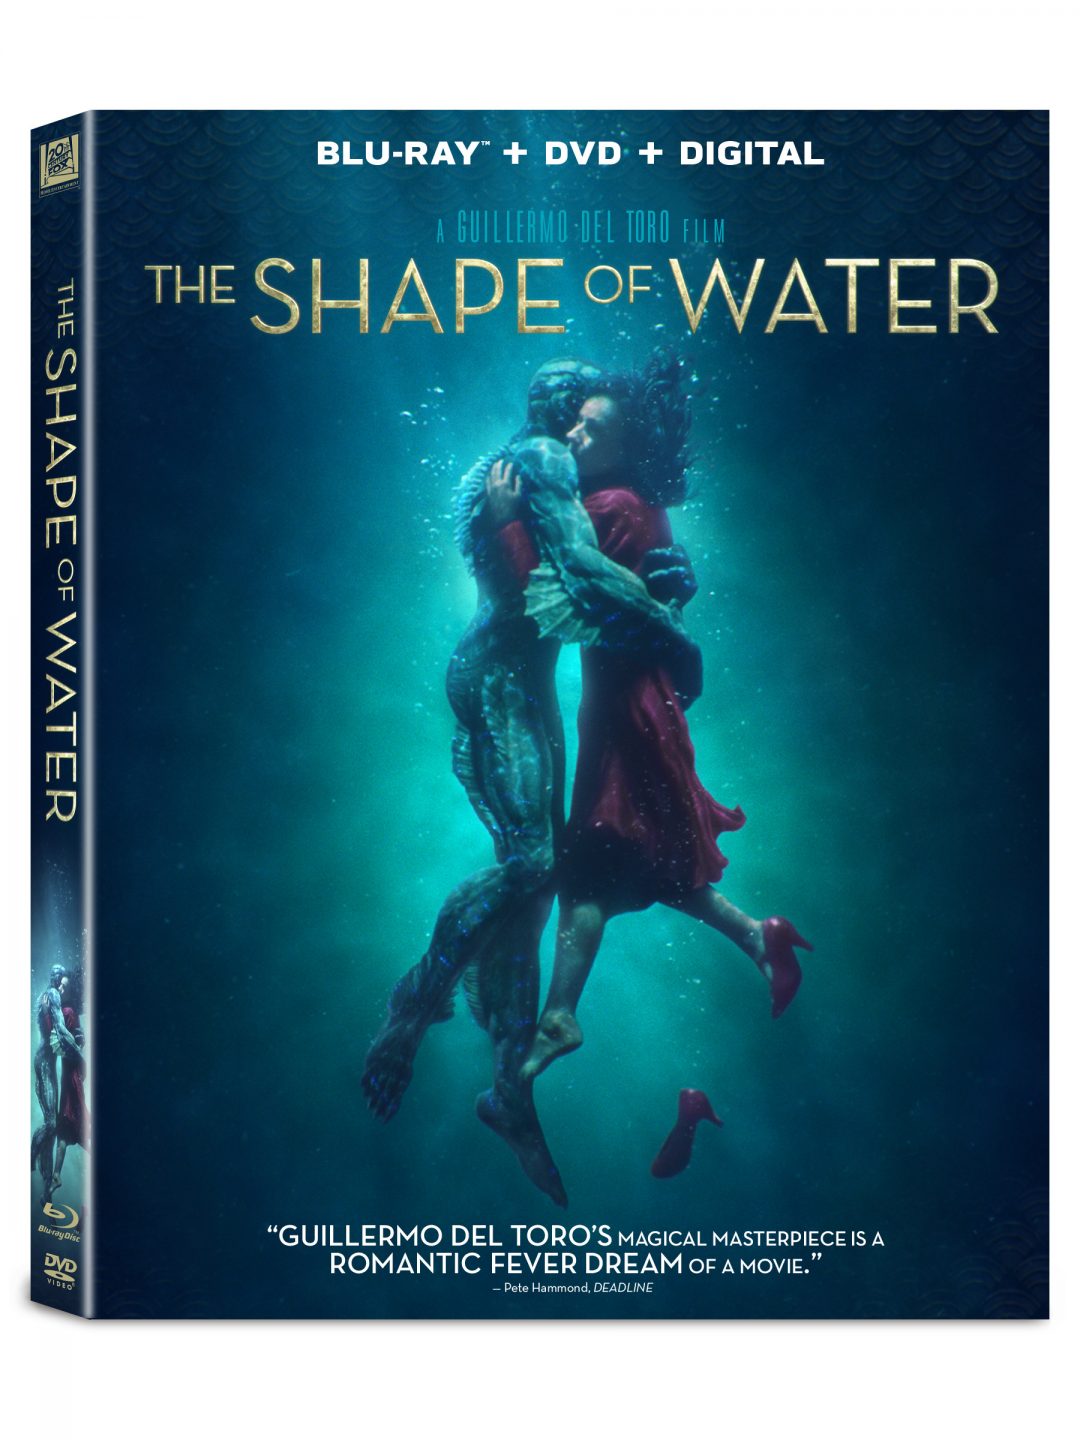 The Shape Of Water Blu-Ray Combo cover (20th Century Fox Home Entertainment)